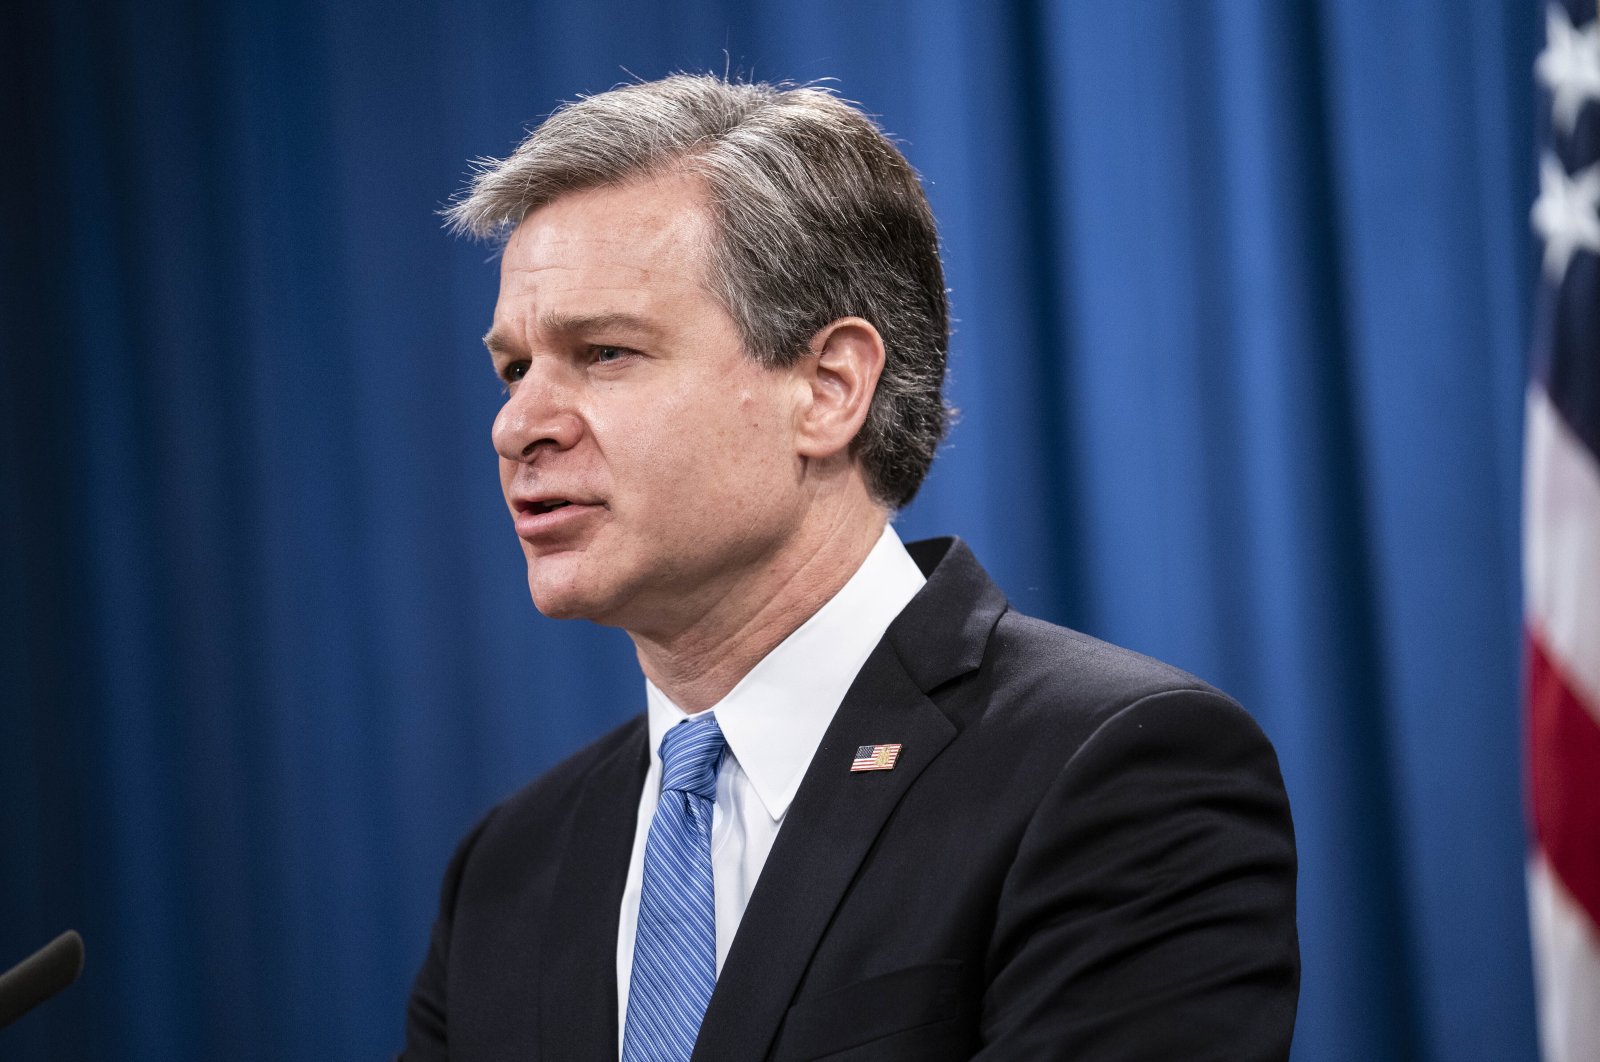 FBI Director Christopher Wray speaks during a virtual news conference at the Department of Justice in Washington, D.C., U.S., Oct. 28, 2020. (AP Photo)